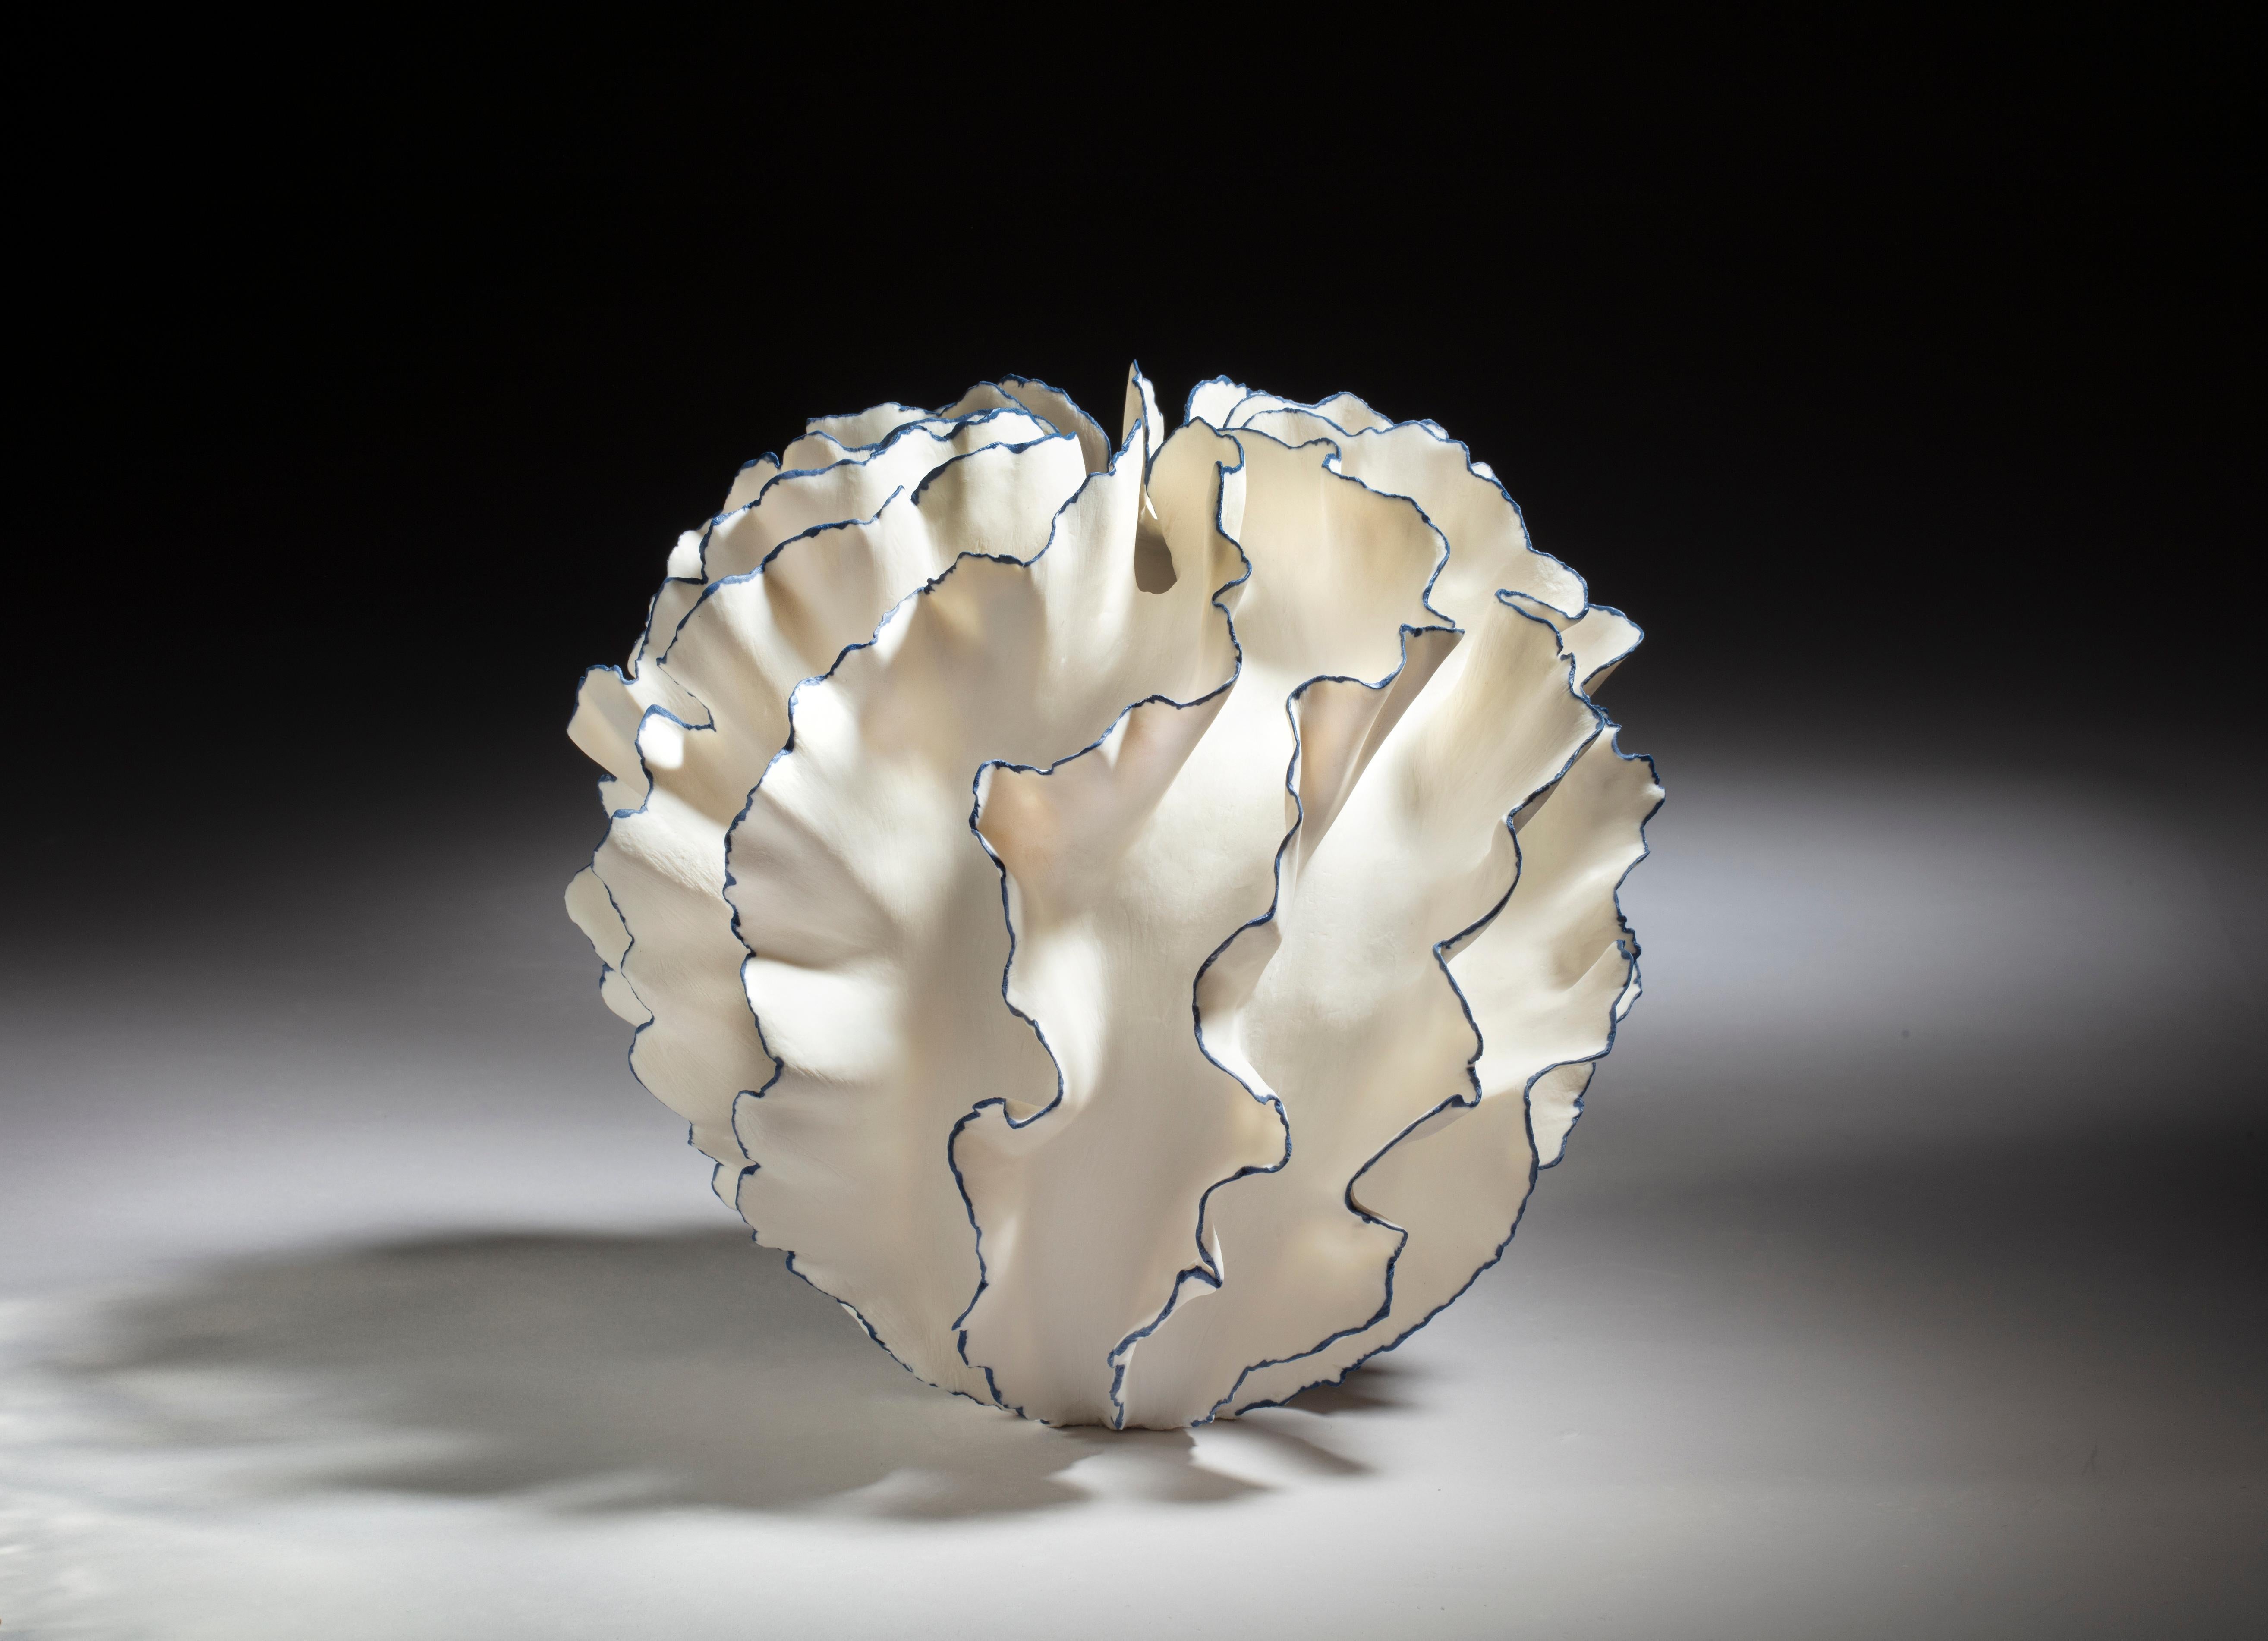 Sandra Davolio
Coral With Blue Edges IV, 2022
Porcelain
Measures: C. 7.3 in. H x 7.9 in. W x 7.9 in. D
Unique
Object No.: 3918.